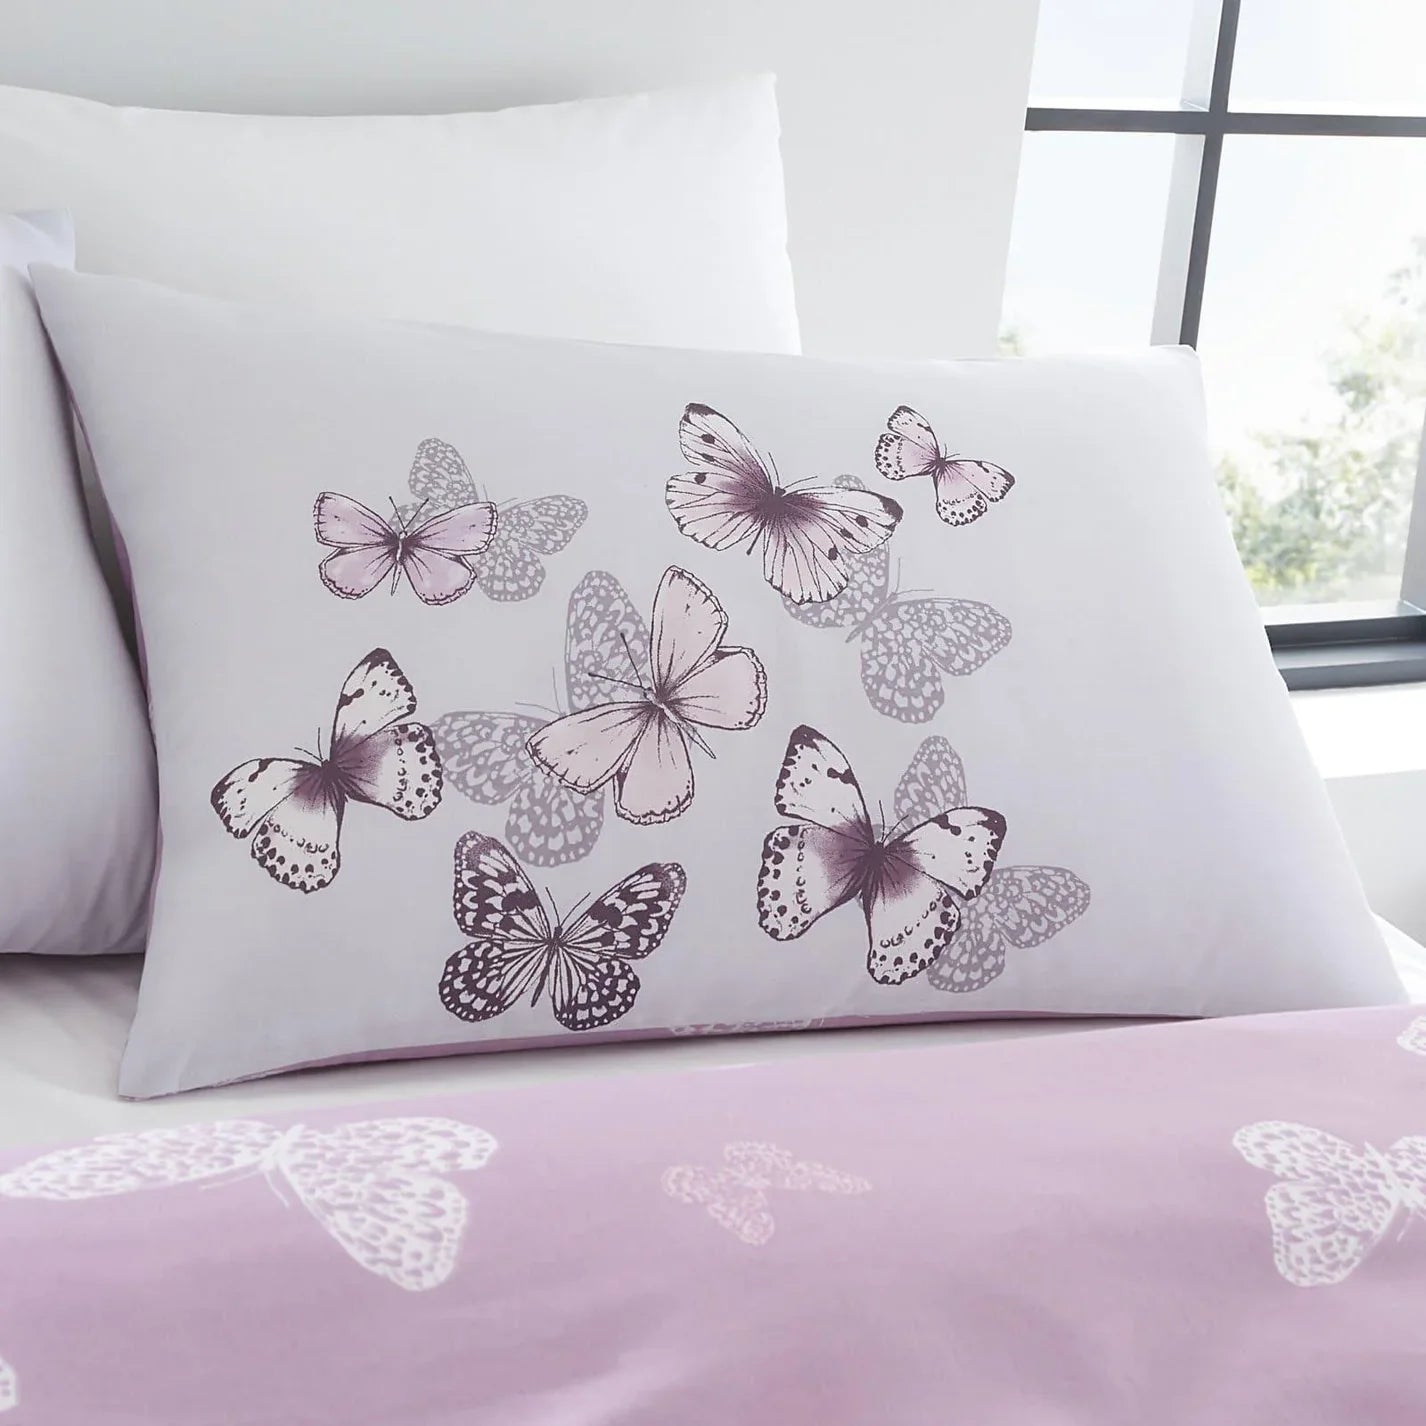 Catherine Lansfield Canterbury Floral Duvet Cover Set - Heather